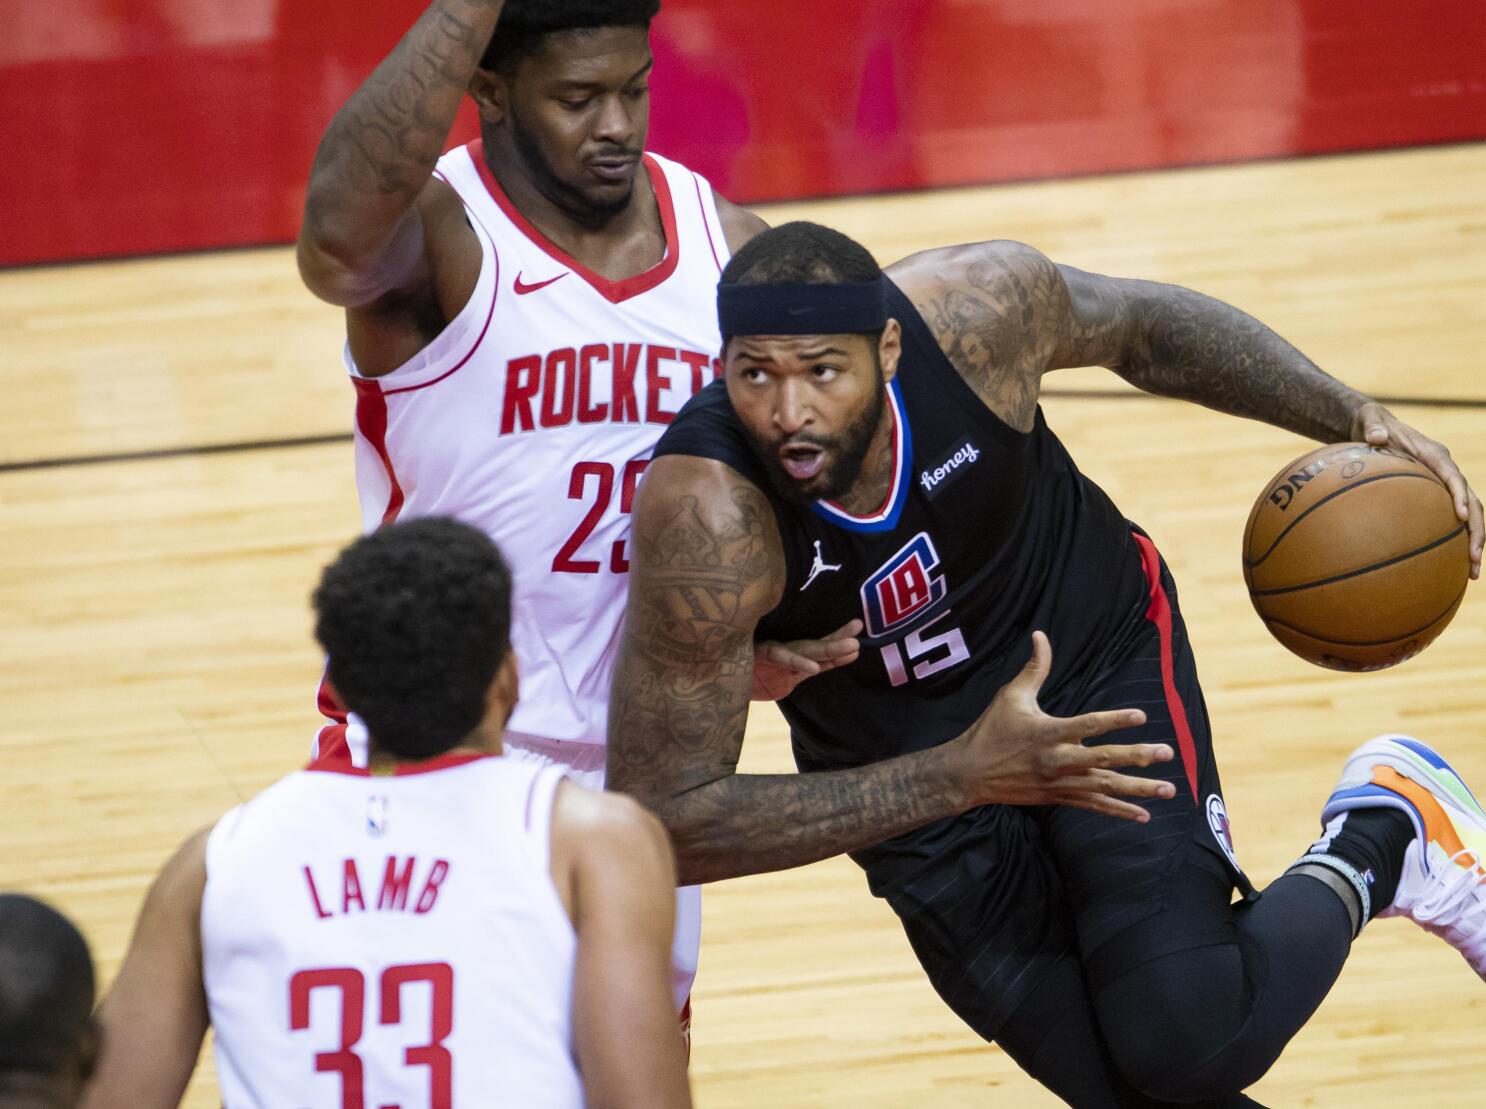 Kings hope to build around DeMarcus Cousins